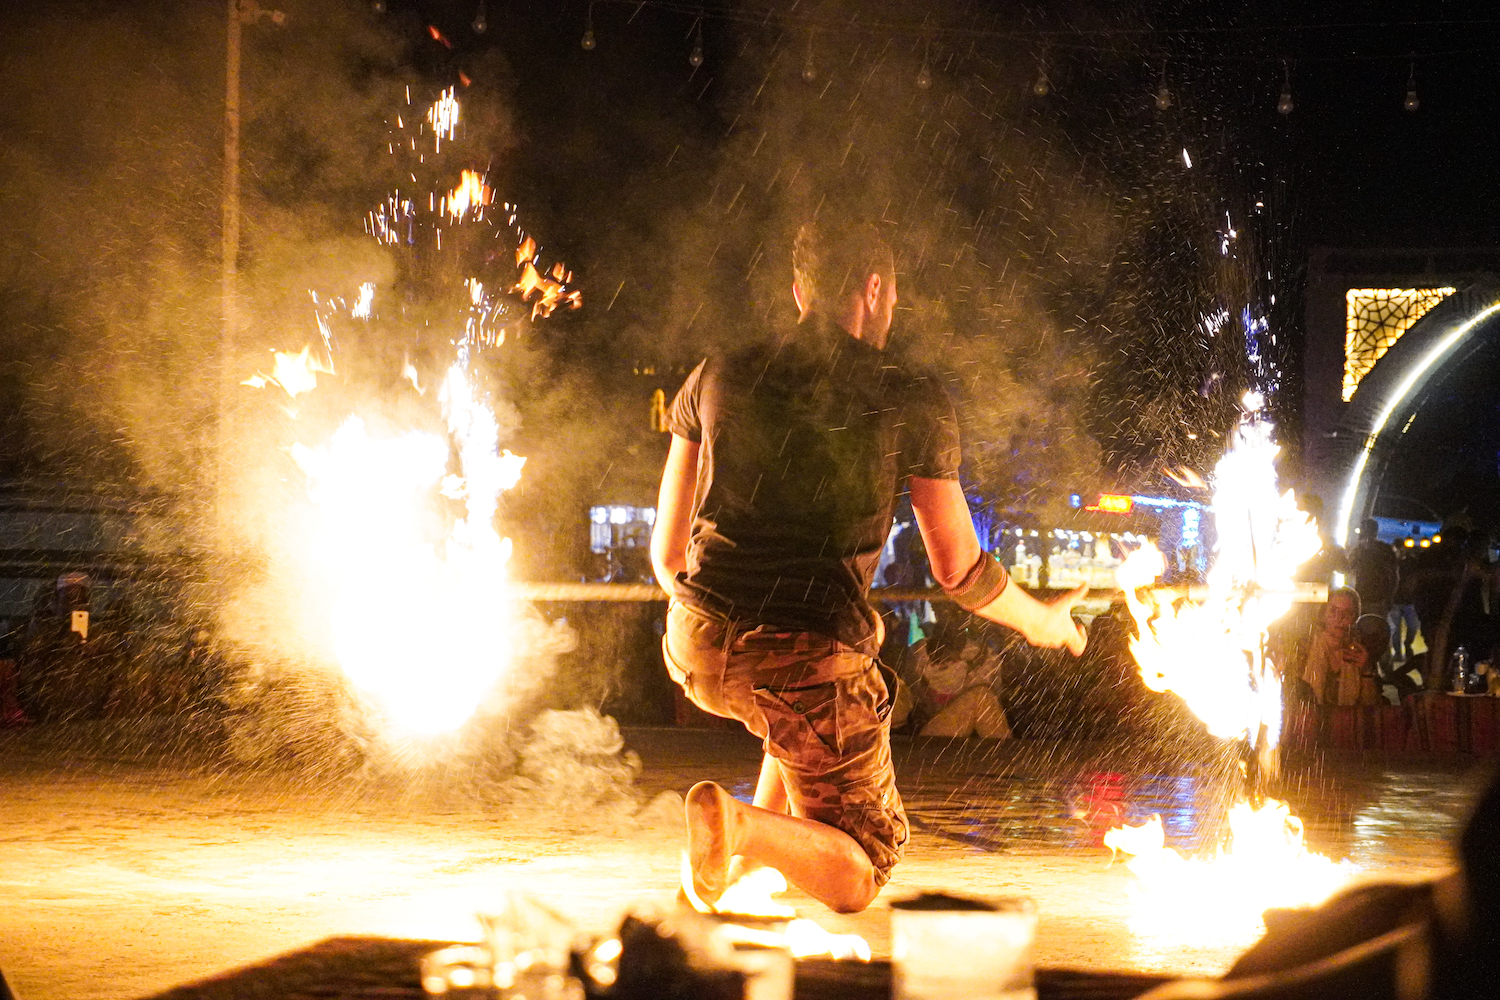 A man in a black shirt and cargo shorts standing on a stage holds a rod with fire coming out of both sides.